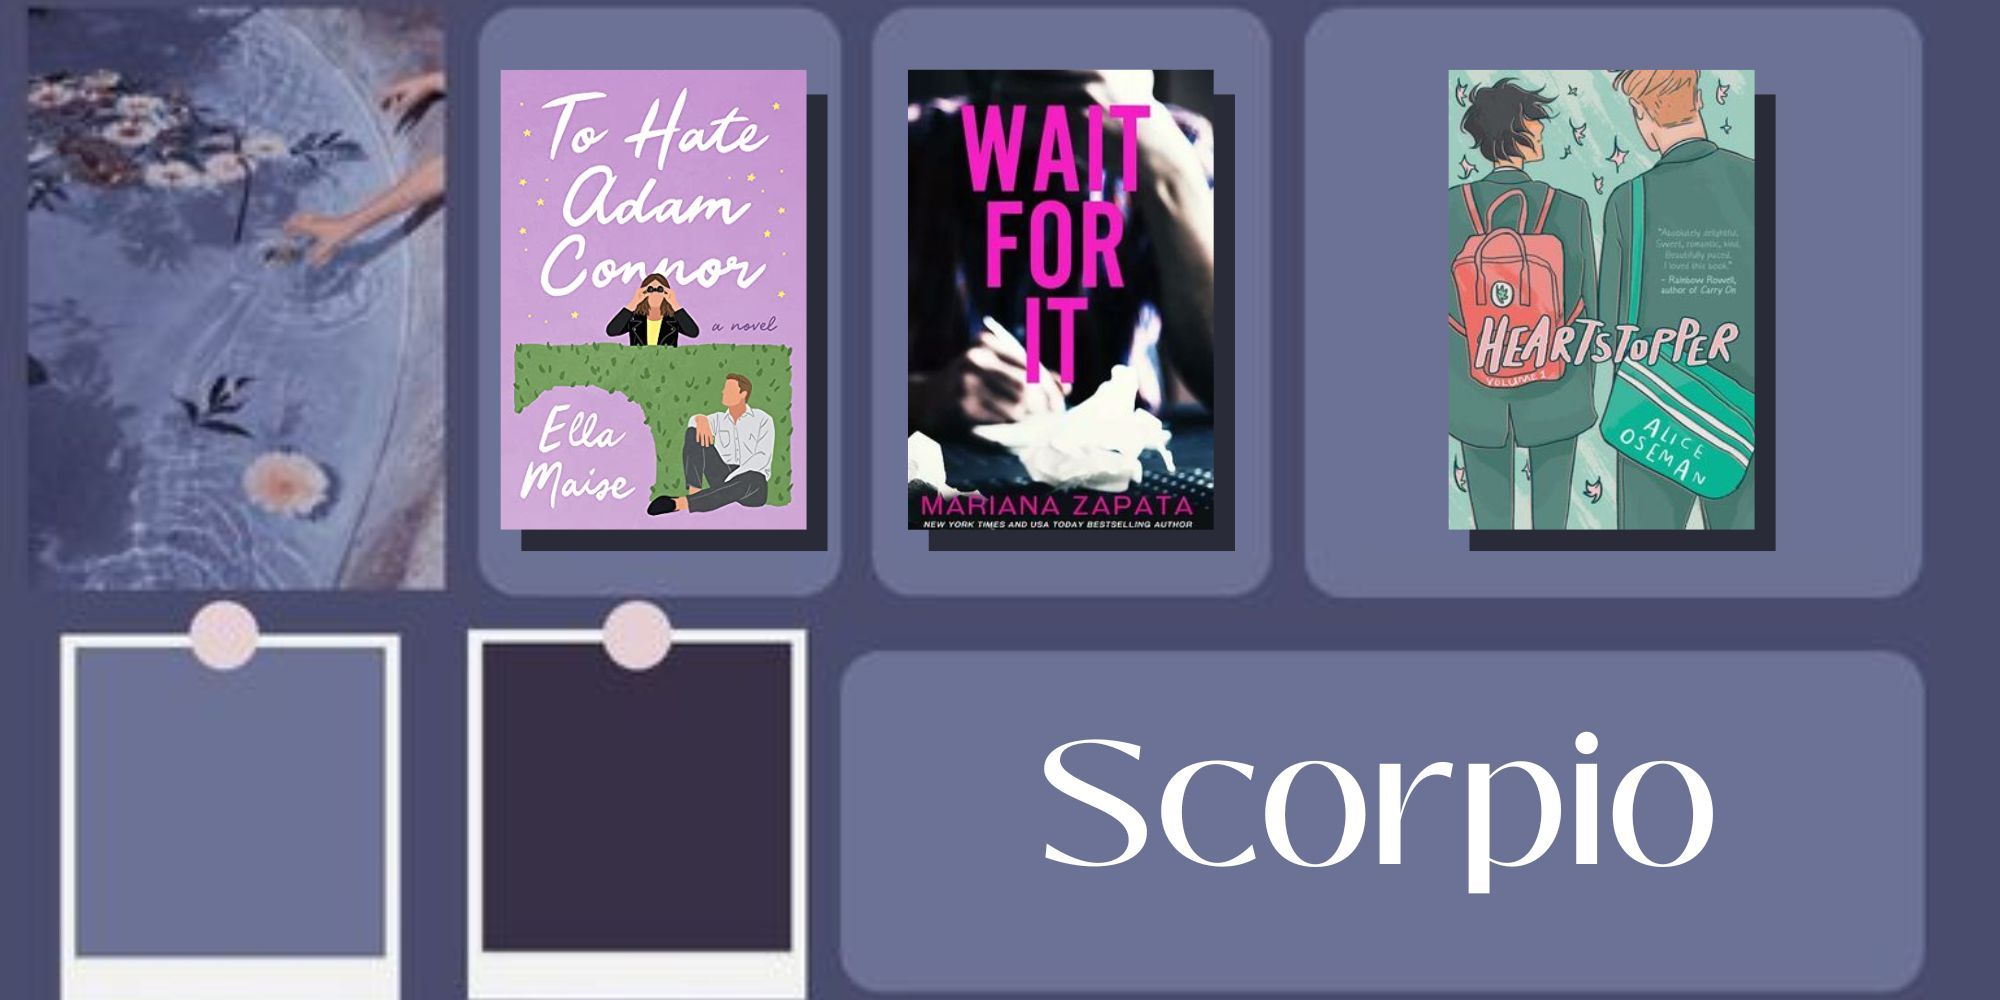 Best Book Recommendations for Scorpio